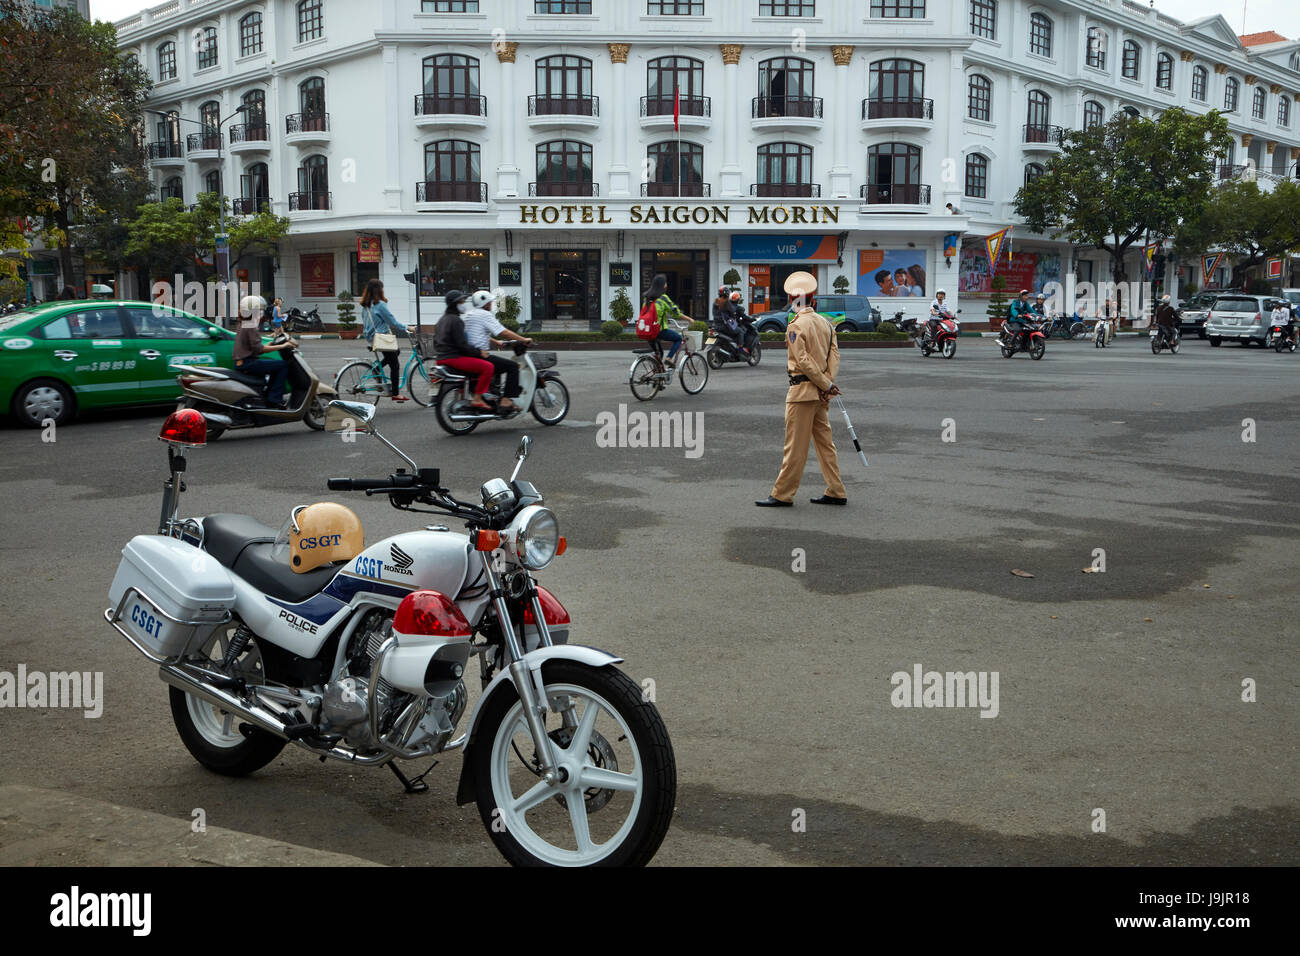 Police motorcycle, busy intersection, and Hotel Saigon Morin, Hue, North Central Coast, Vietnam Stock Photo